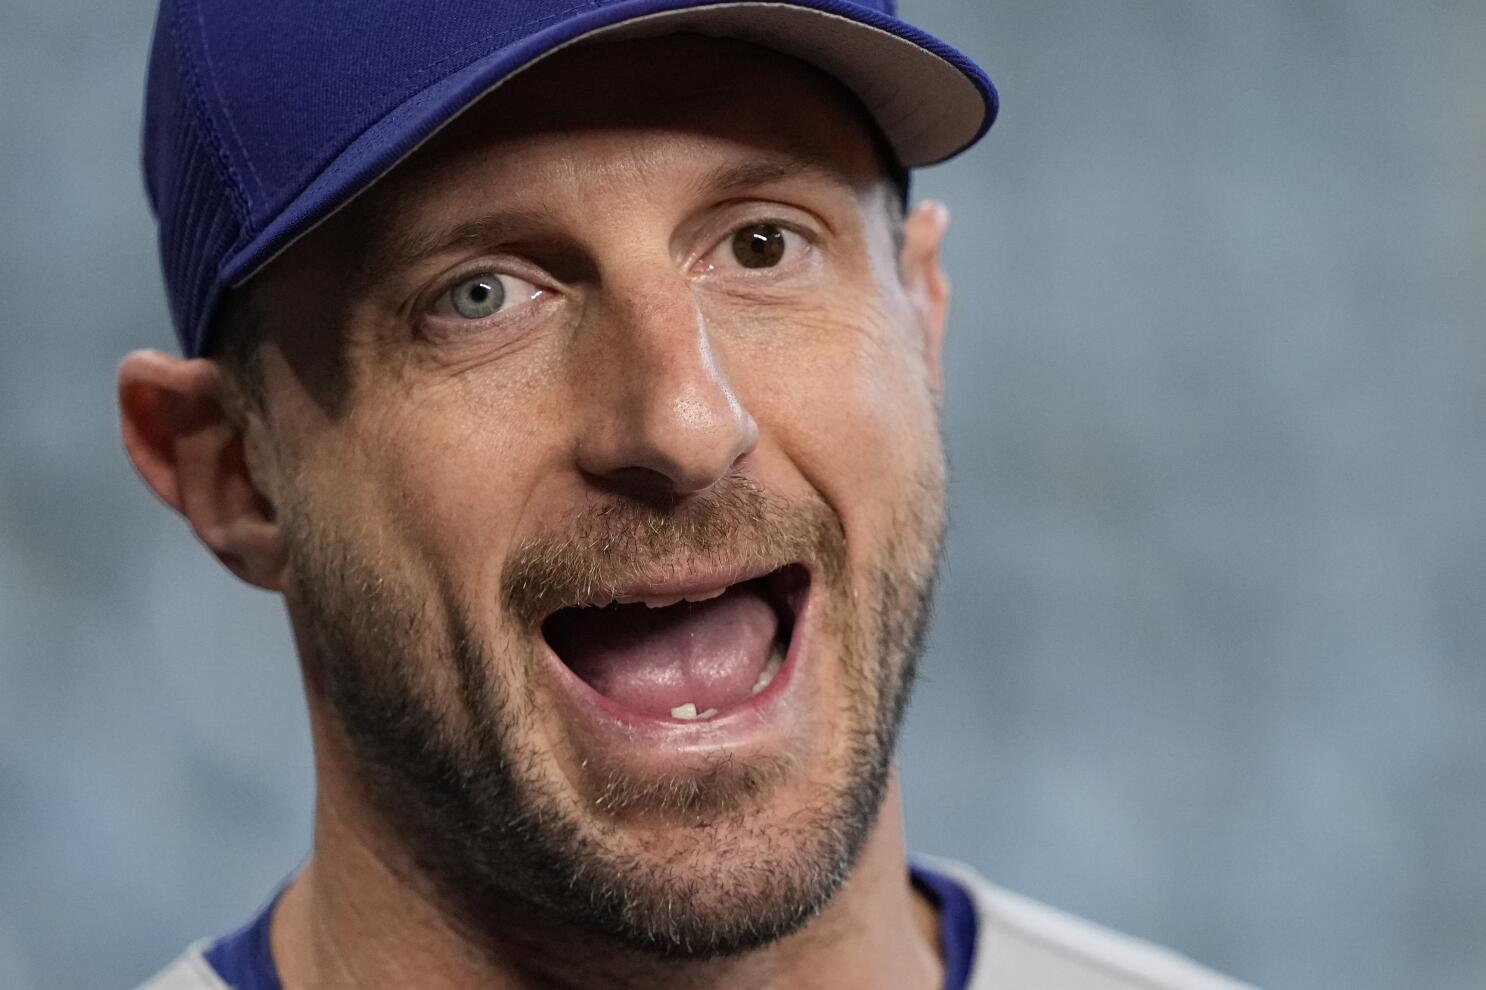 Max Scherzer says he's 'ready to go' for Rangers in ALCS